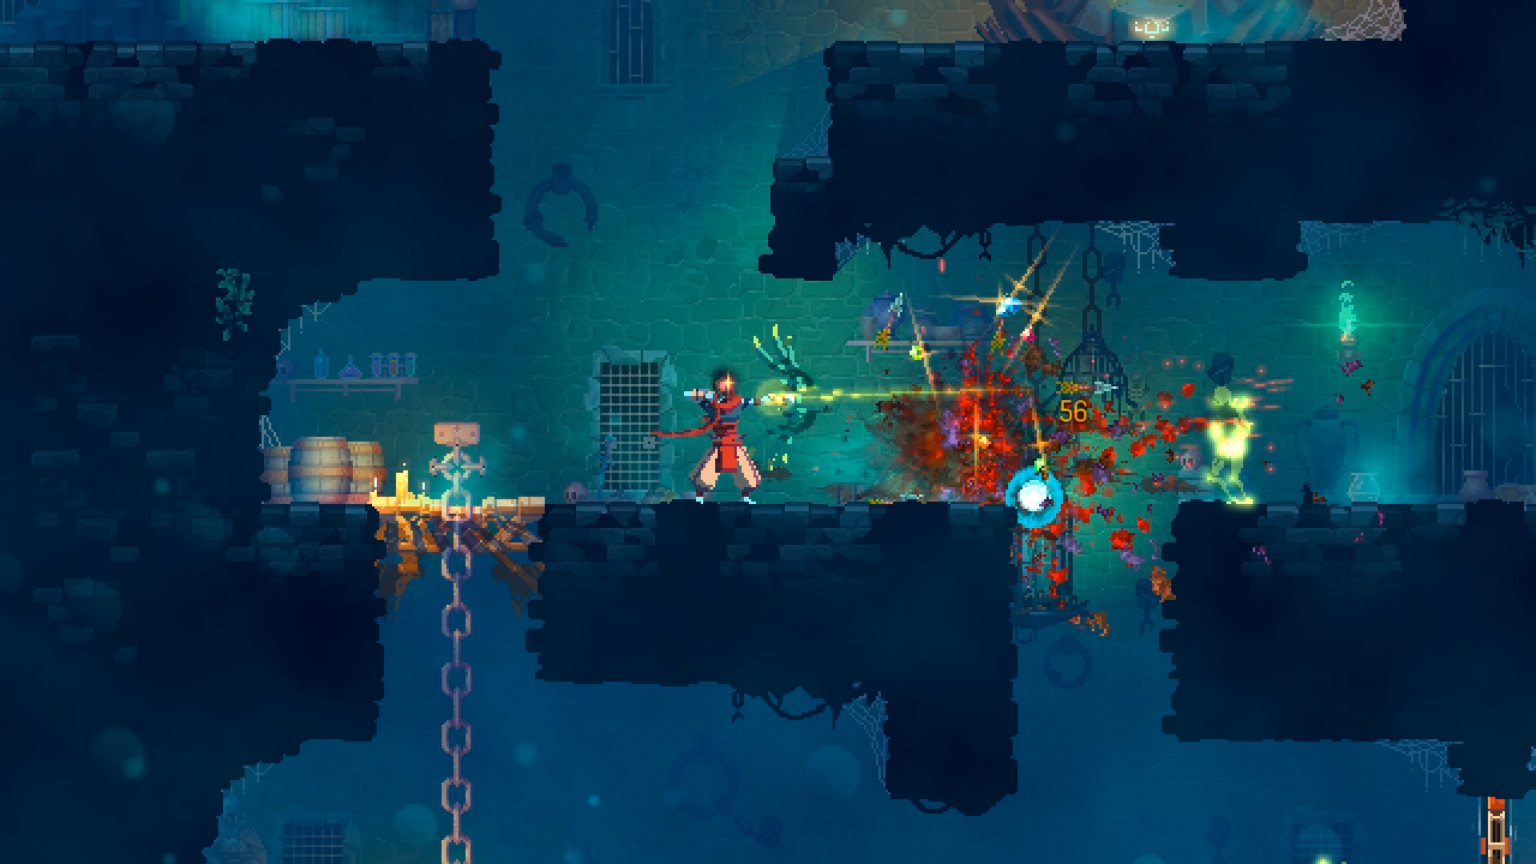 Dead Cells download the last version for apple